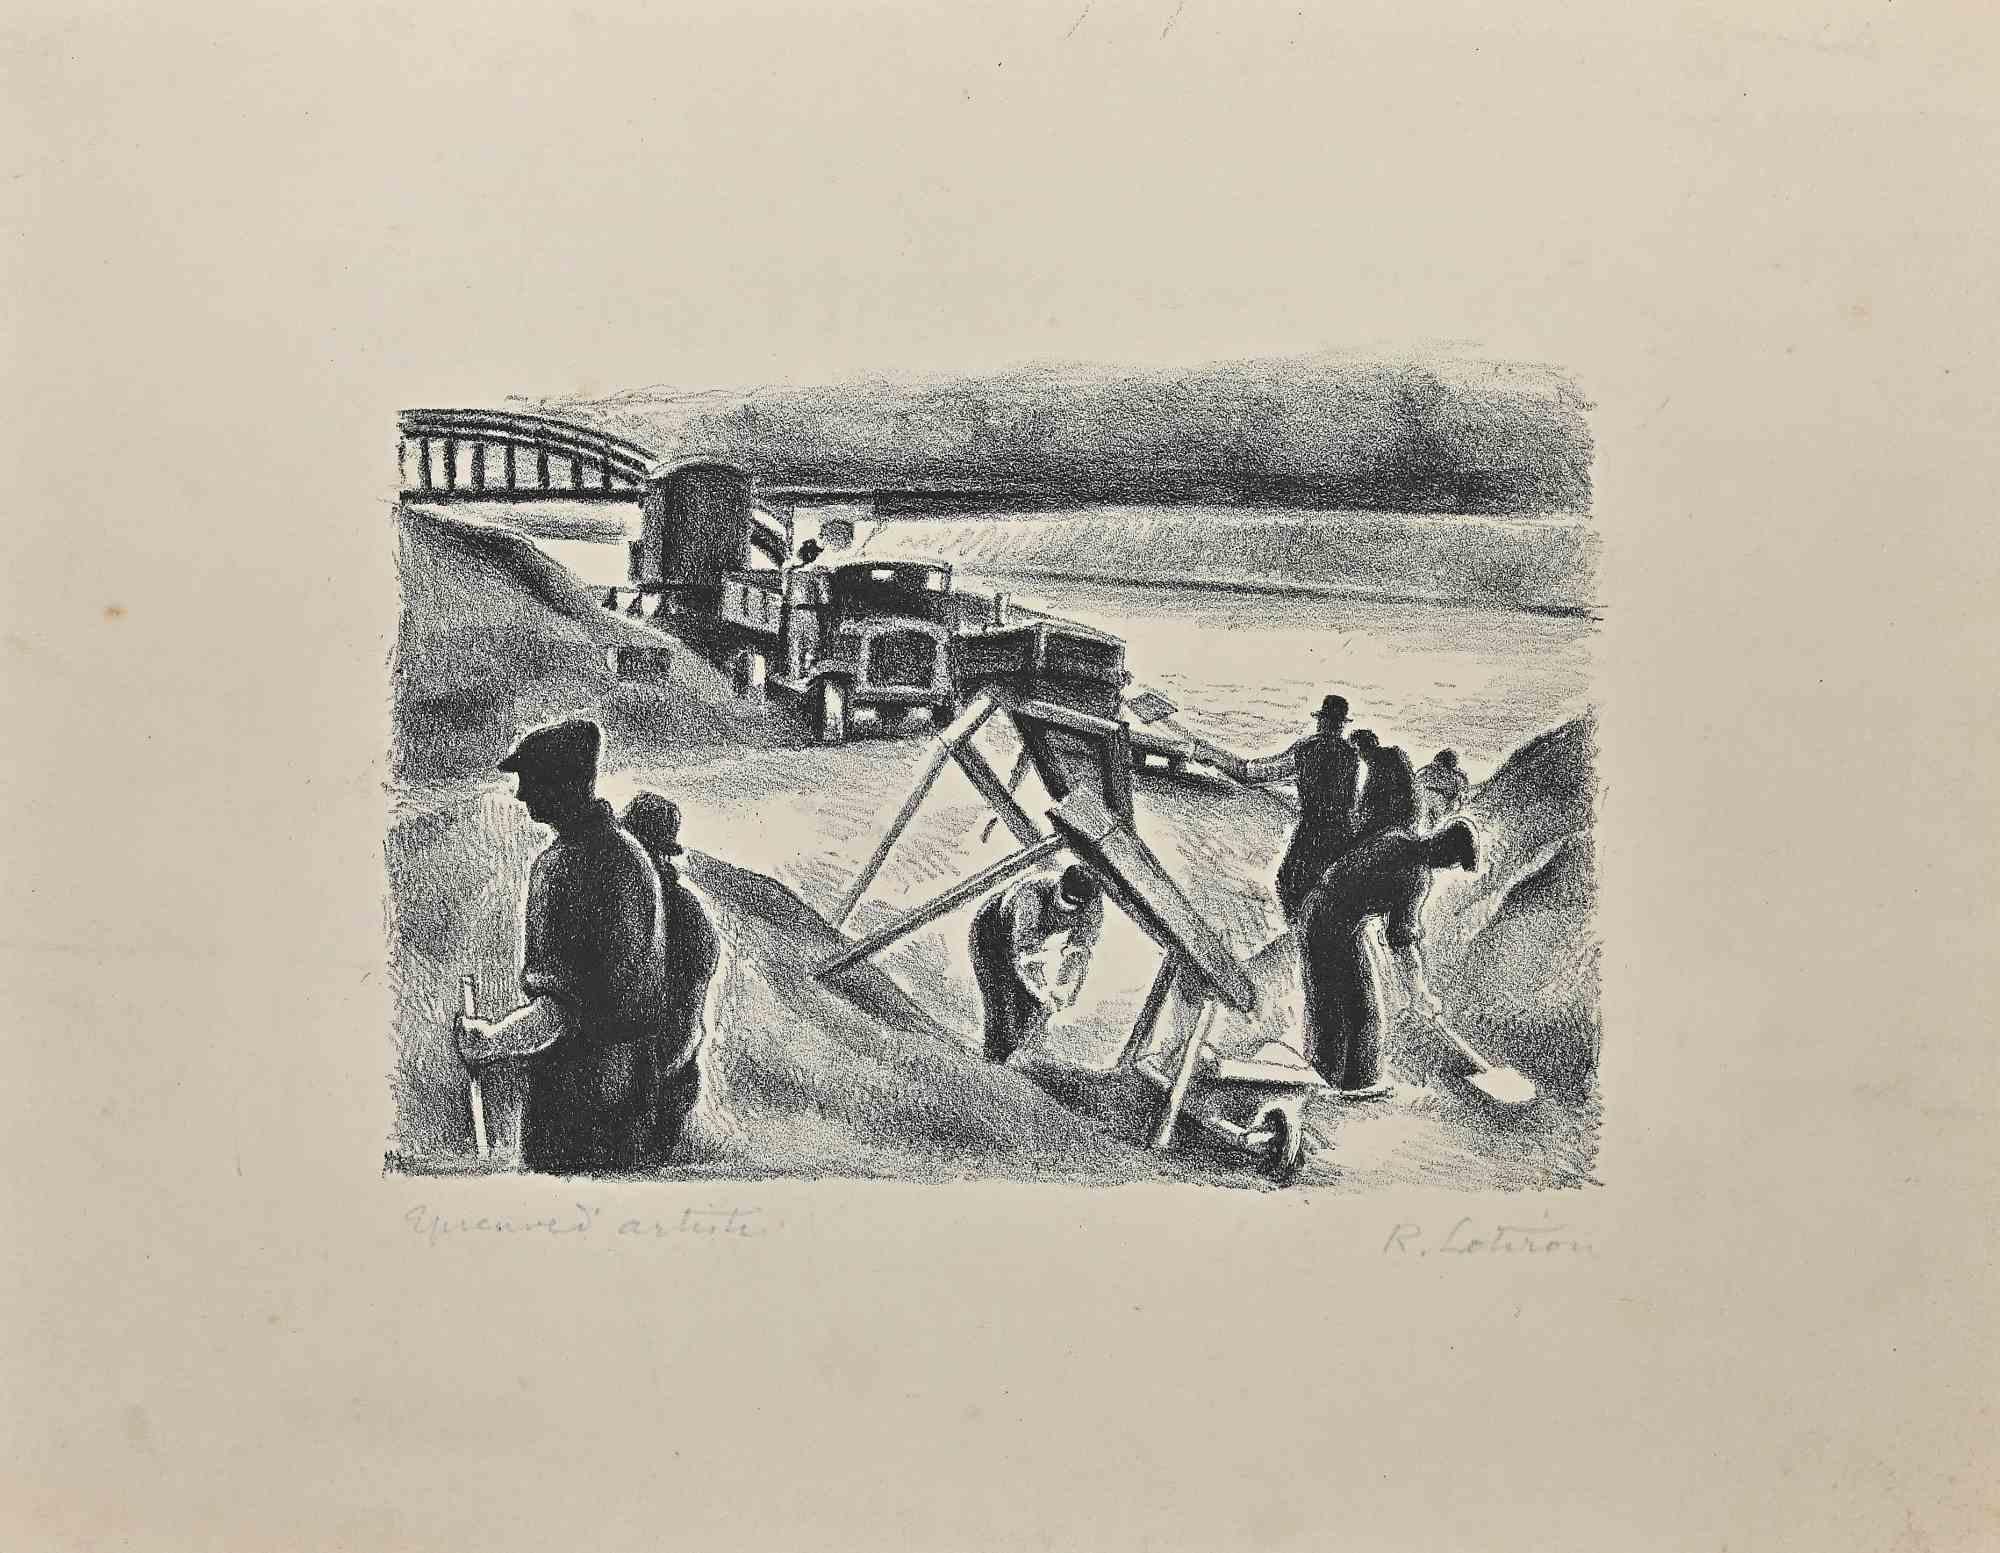 Les Travaux - Lithograph by Robert Lotiron - Early 20th Century